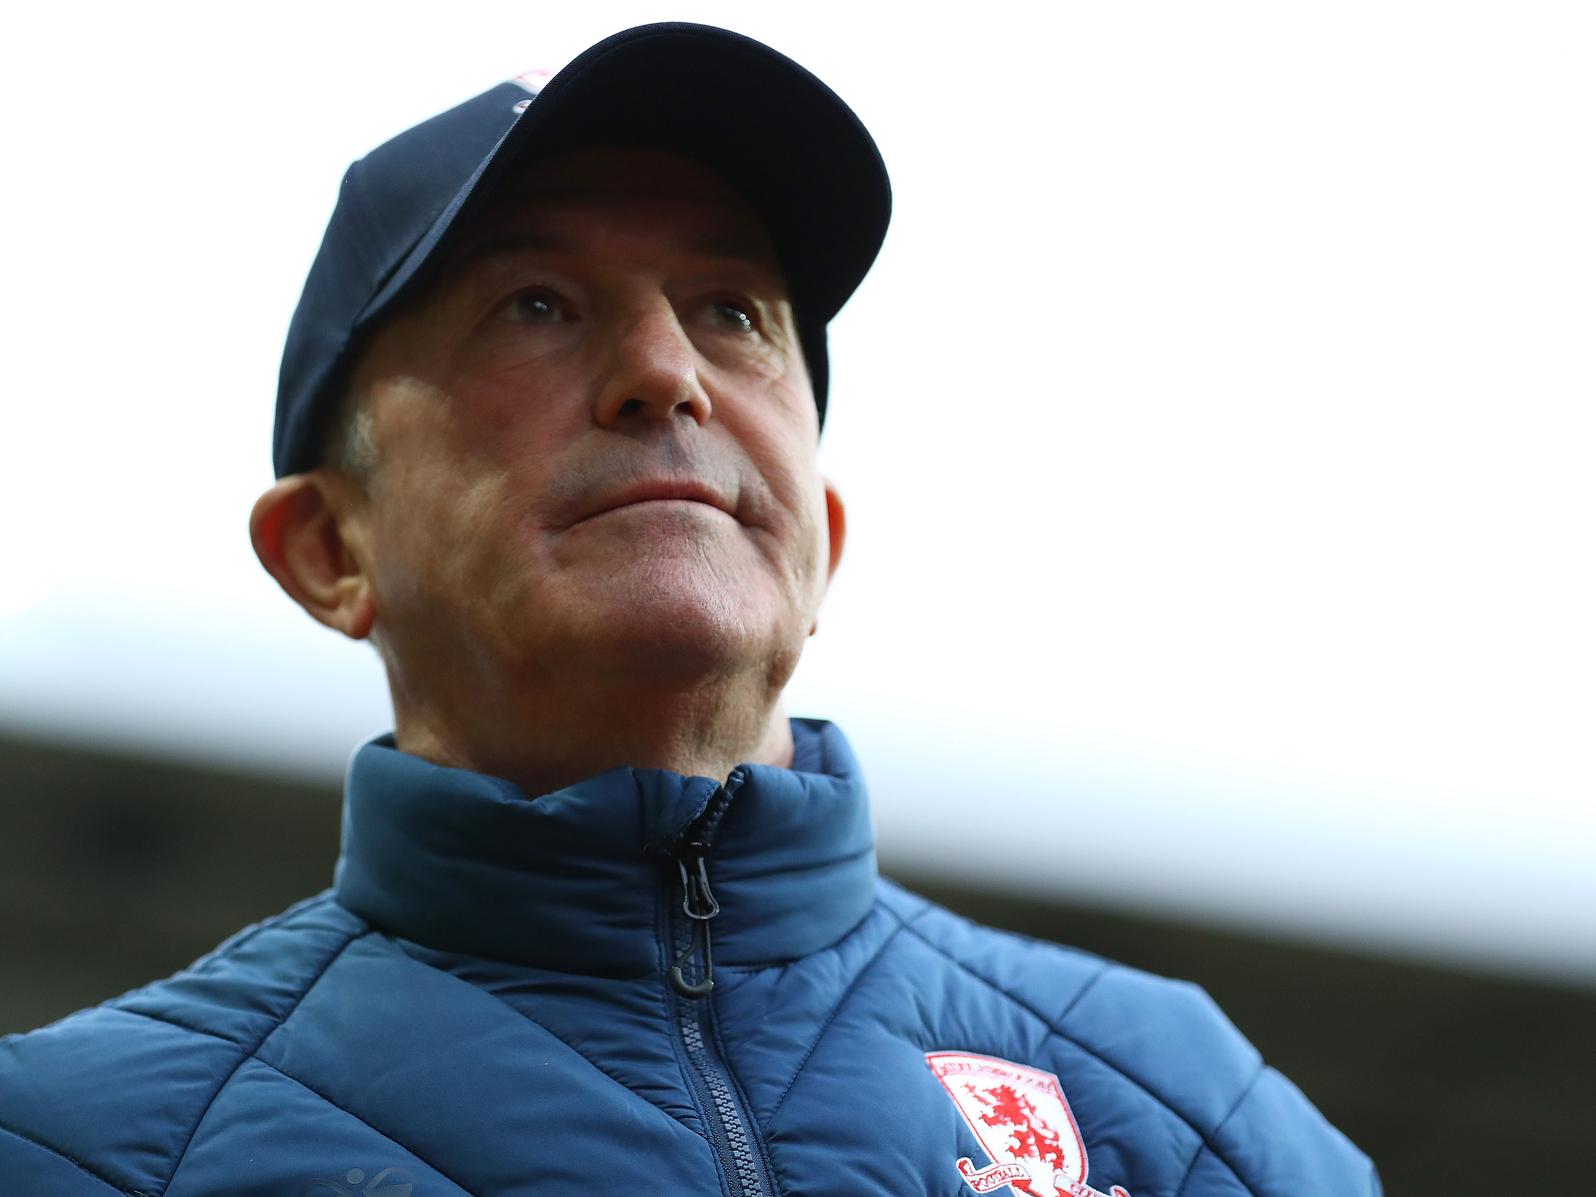 Former Stoke City manager Tony Pulis has claimed that Leeds United are the 'biggest' club in the Championship, and has backed Patrick Bamford to thrive under the pressure to win over the club's fans. (Sky Sports)